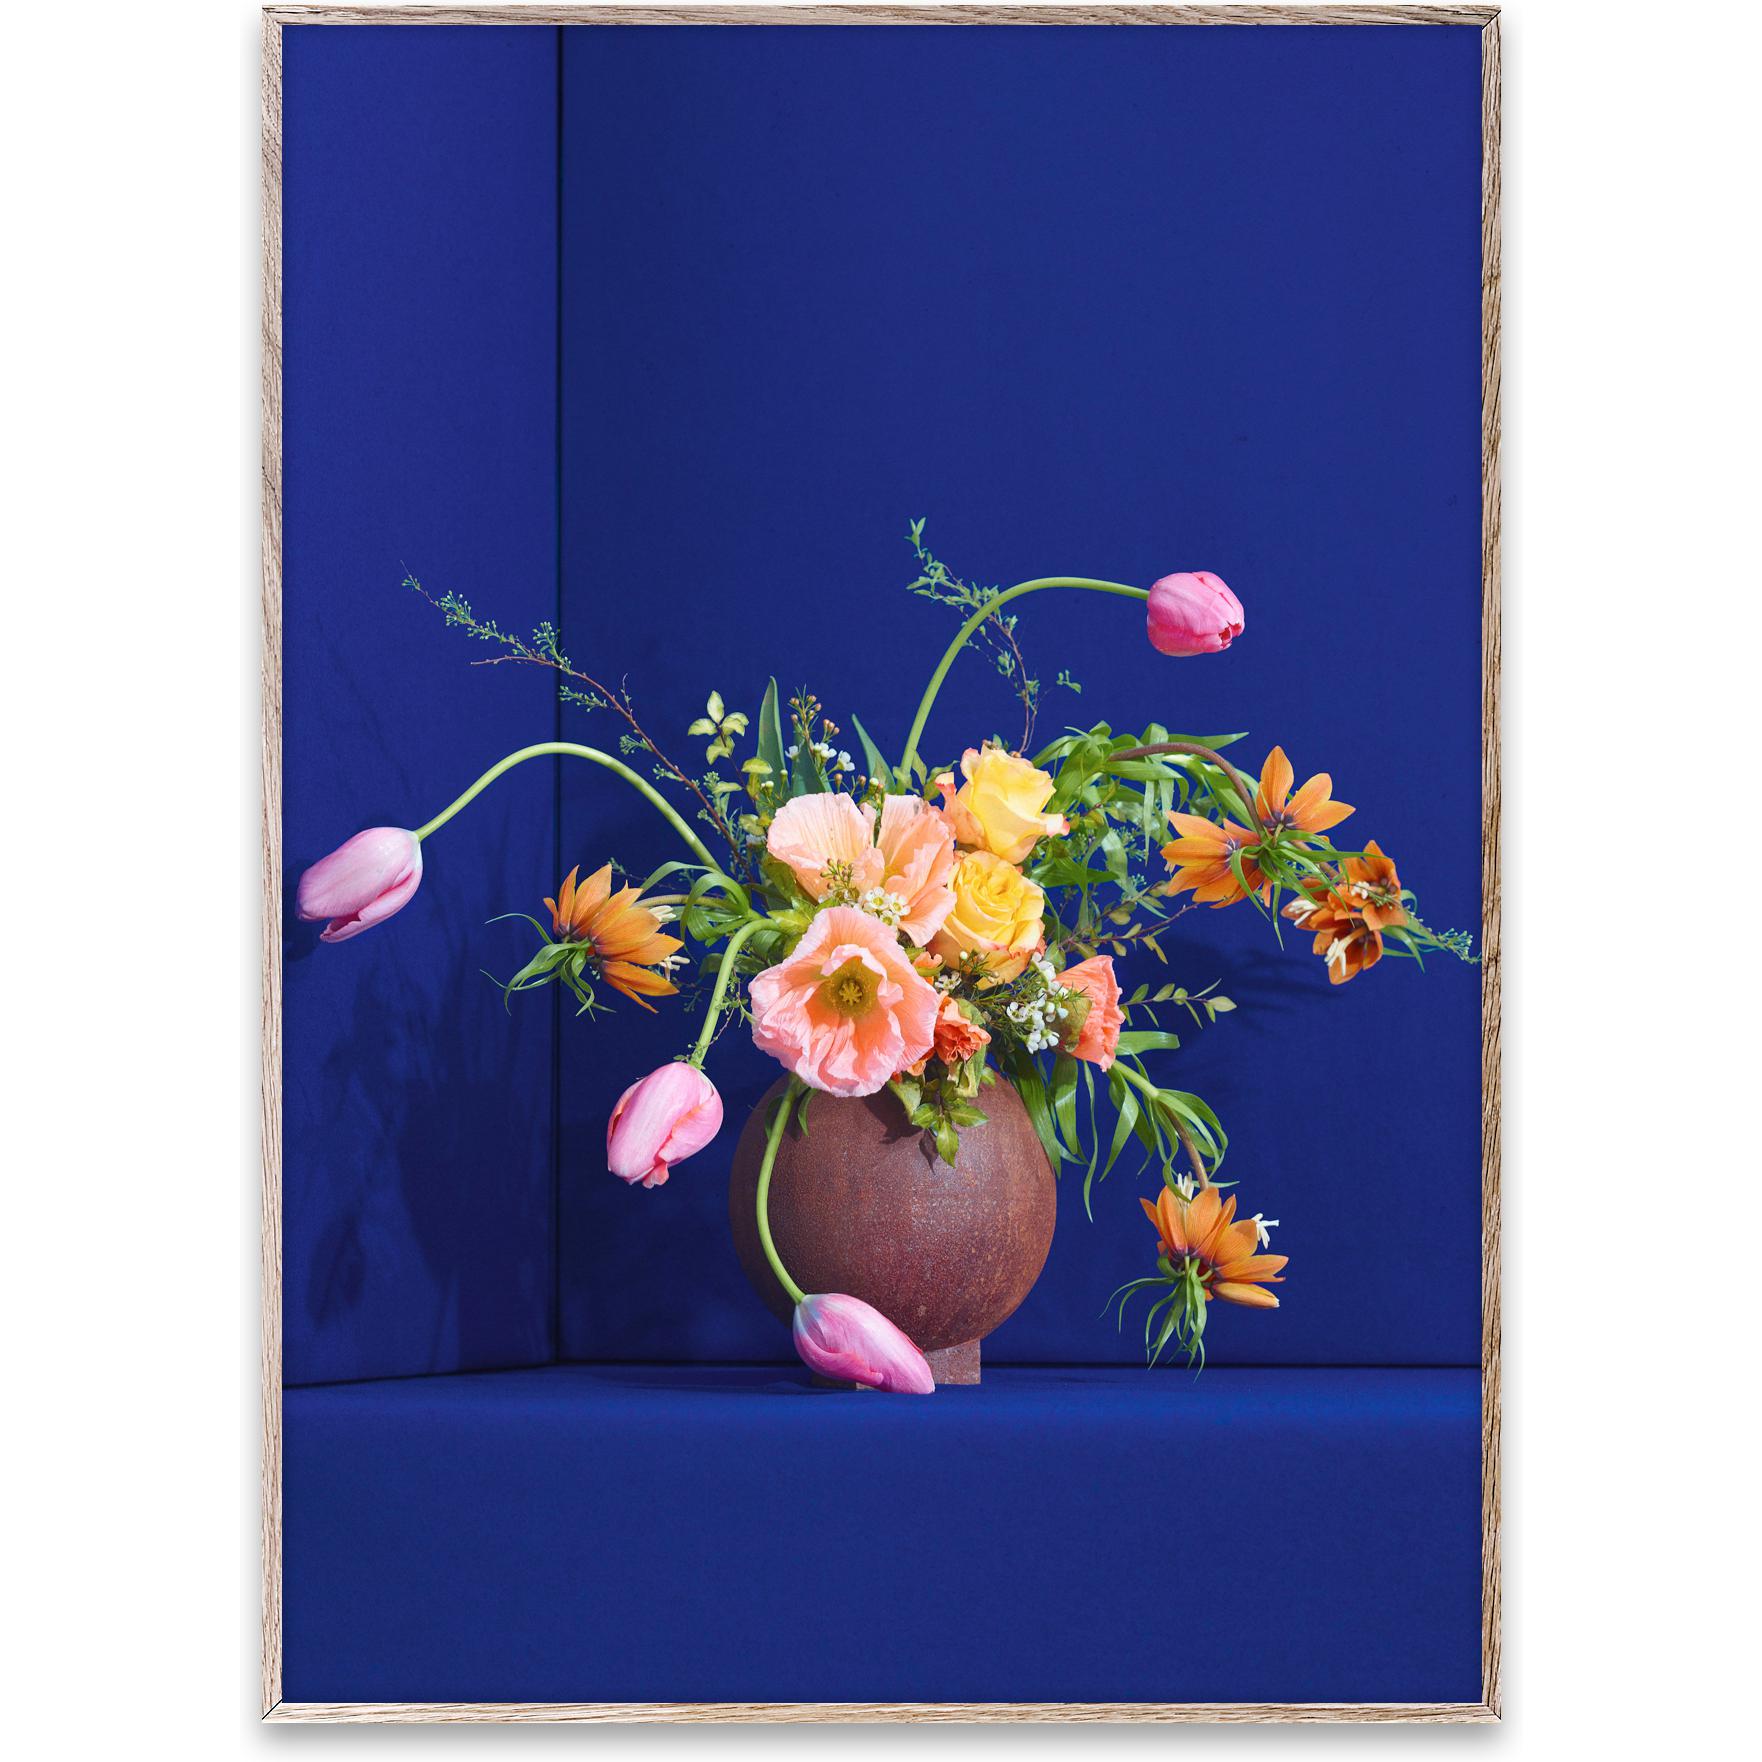 Paper Collective Blomst 01 Poster 70x100 cm, blauw